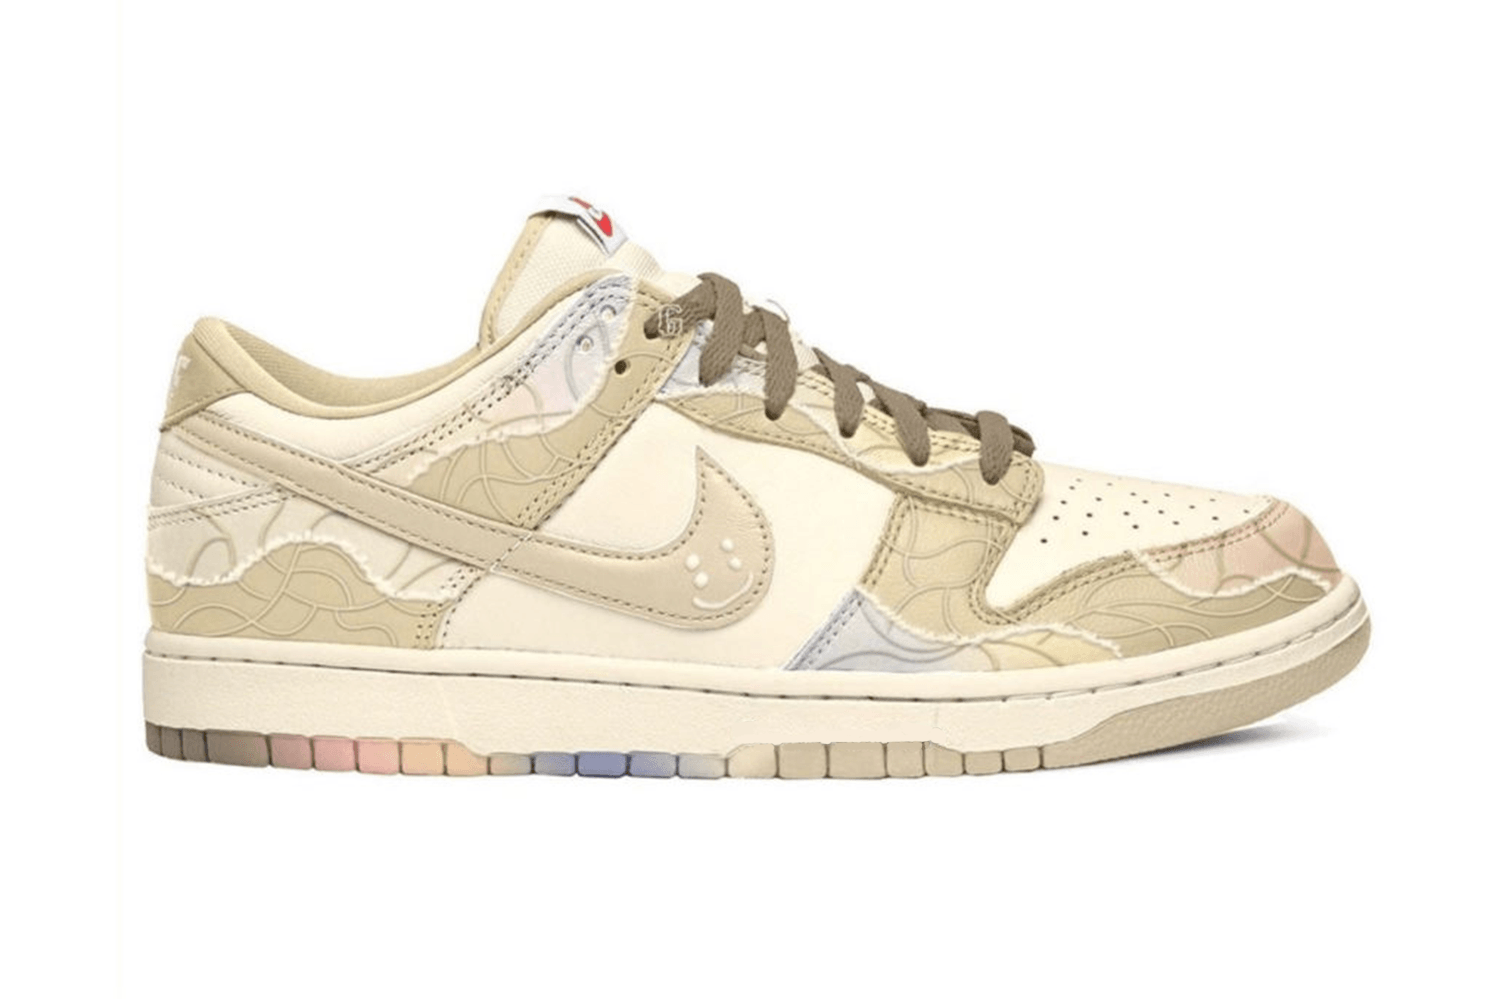 The CPFM x Nike Dunk Low SP Leather 'Barley Sail'